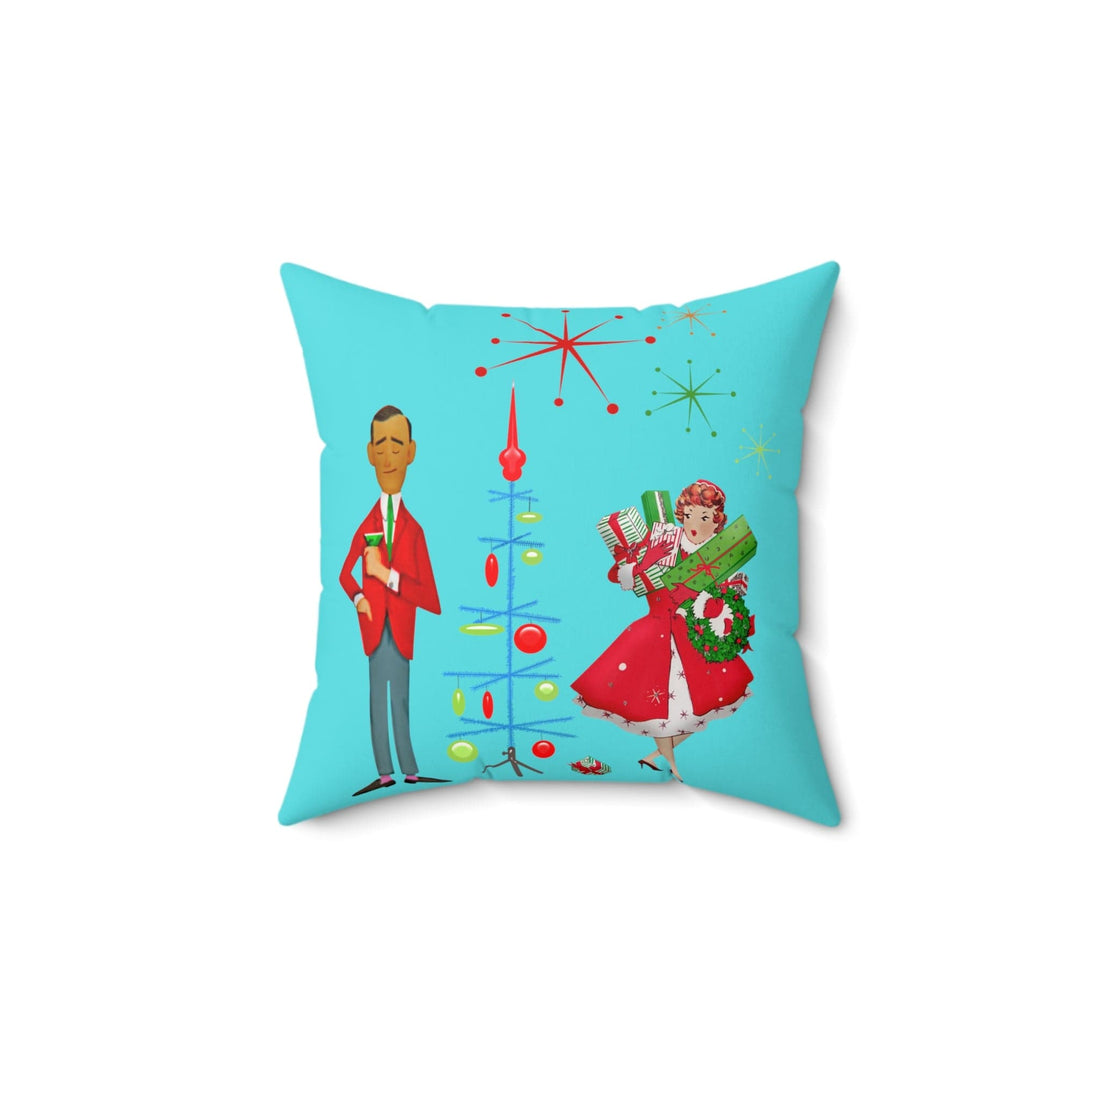 Mid Century Christmas, His And Her, Kitschy Cute, Vintage Mod Aqua Blue, Red, Candy Cane Pillow And Insert Home Decor 14&quot; × 14&quot;